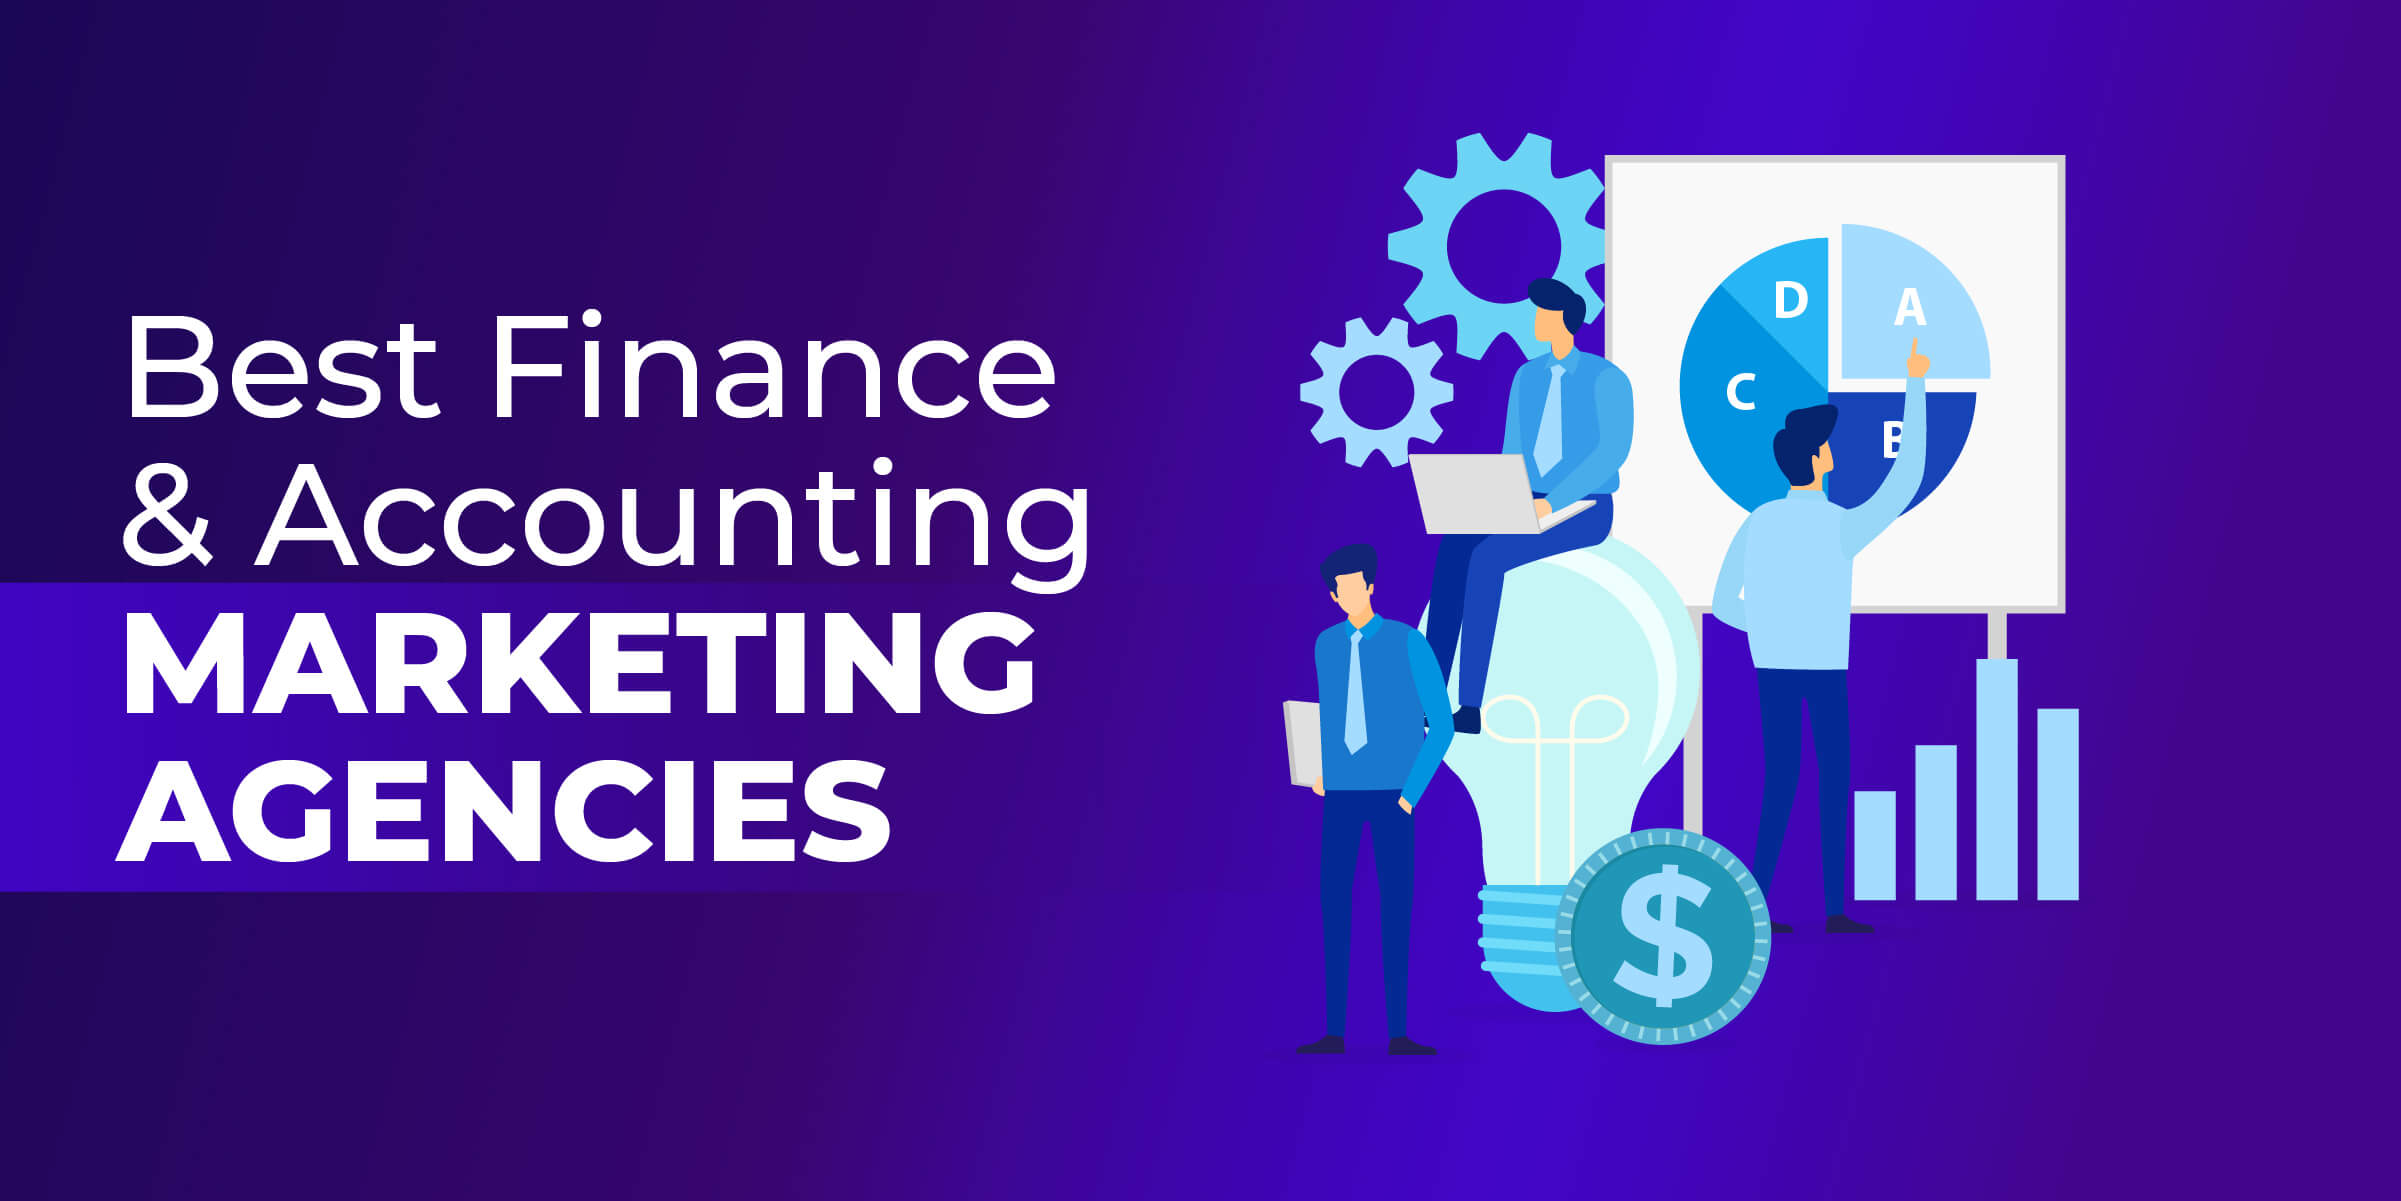 Best Finance/Accounting Marketing Agencies